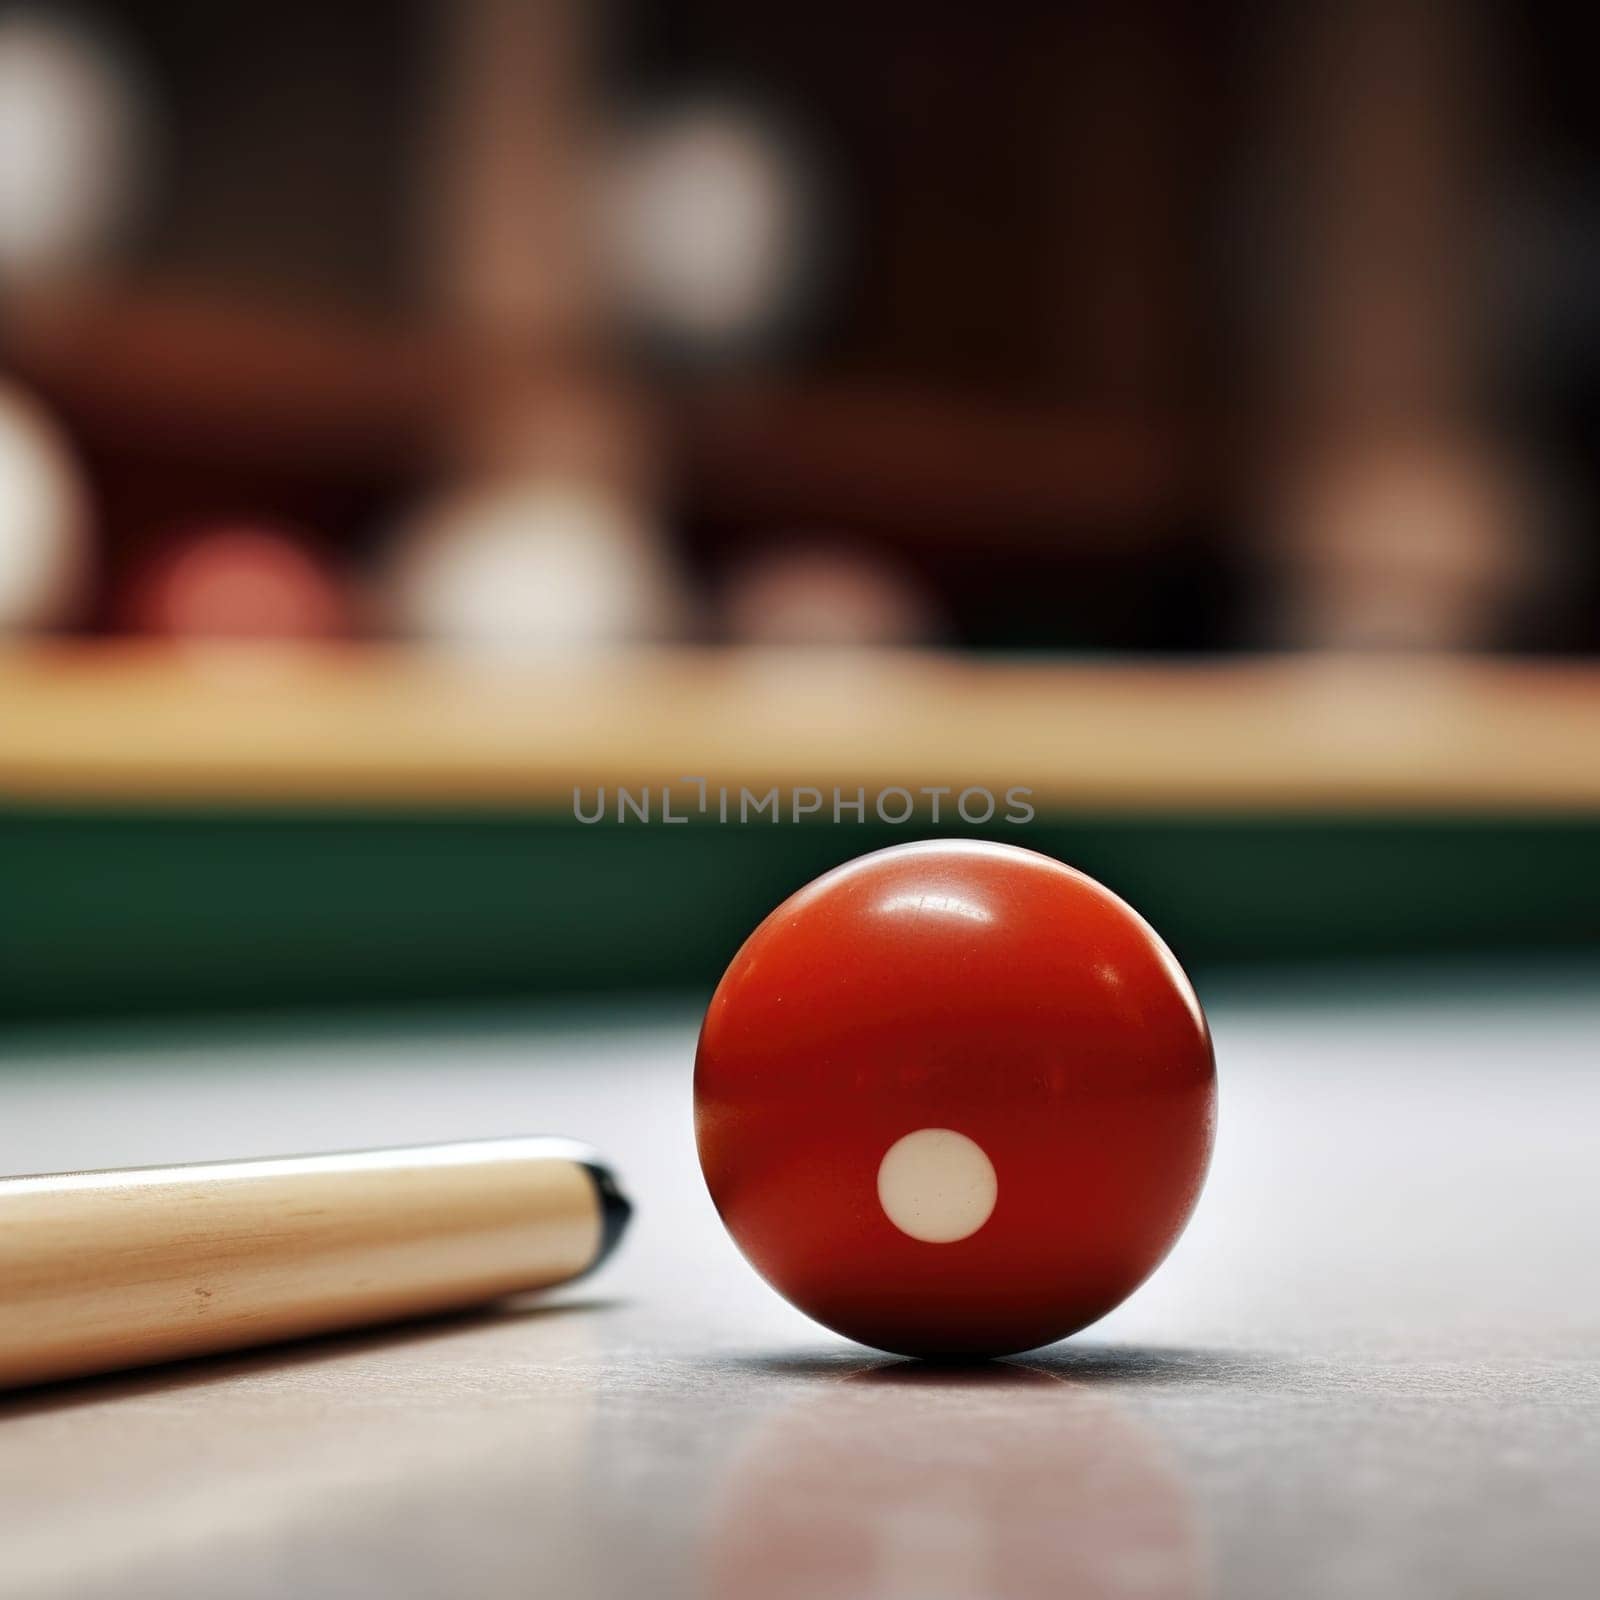 A billiard ball and a cue stick on a table